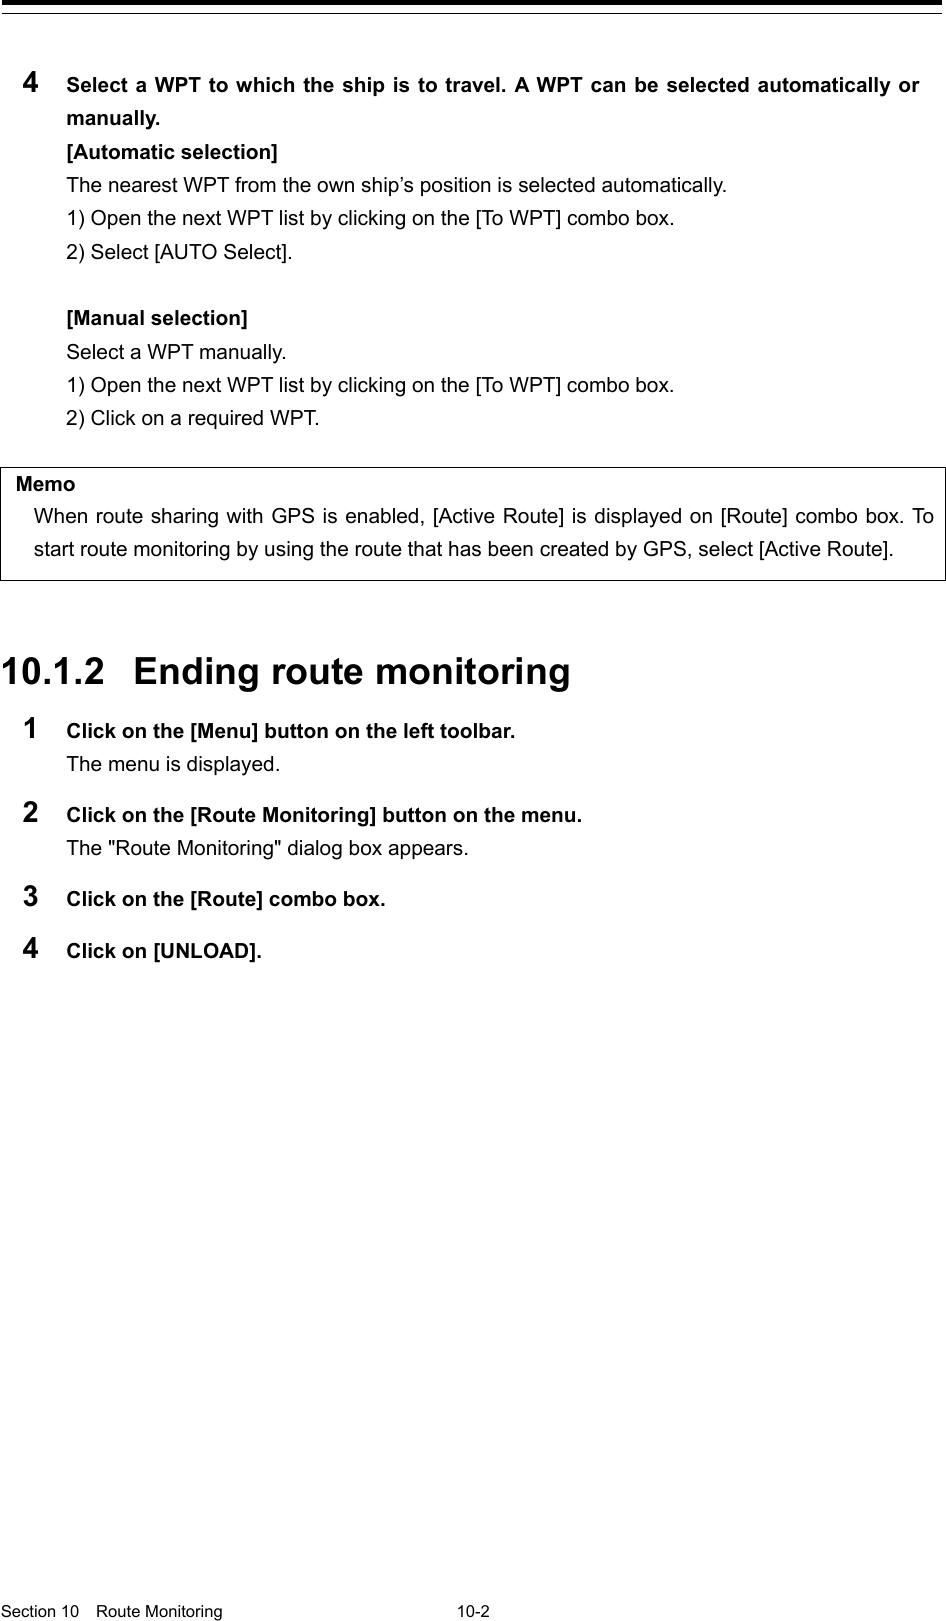   Section 10  Route Monitoring  10-2  4  Select a WPT to which the ship is to travel. A WPT can be selected automatically or manually. [Automatic selection] The nearest WPT from the own ship’s position is selected automatically. 1) Open the next WPT list by clicking on the [To W PT ] combo box. 2) Select [AUTO Select].  [Manual selection] Select a WPT manually. 1) Open the next WPT list by clicking on the [To W PT ] combo box. 2) Click on a required WPT.  Memo When route sharing with GPS is enabled, [Active Route] is displayed on [Route] combo box. To start route monitoring by using the route that has been created by GPS, select [Active Route].   10.1.2 Ending route monitoring 1  Click on the [Menu] button on the left toolbar. The menu is displayed. 2  Click on the [Route Monitoring] button on the menu. The &quot;Route Monitoring&quot; dialog box appears. 3  Click on the [Route] combo box. 4  Click on [UNLOAD].    